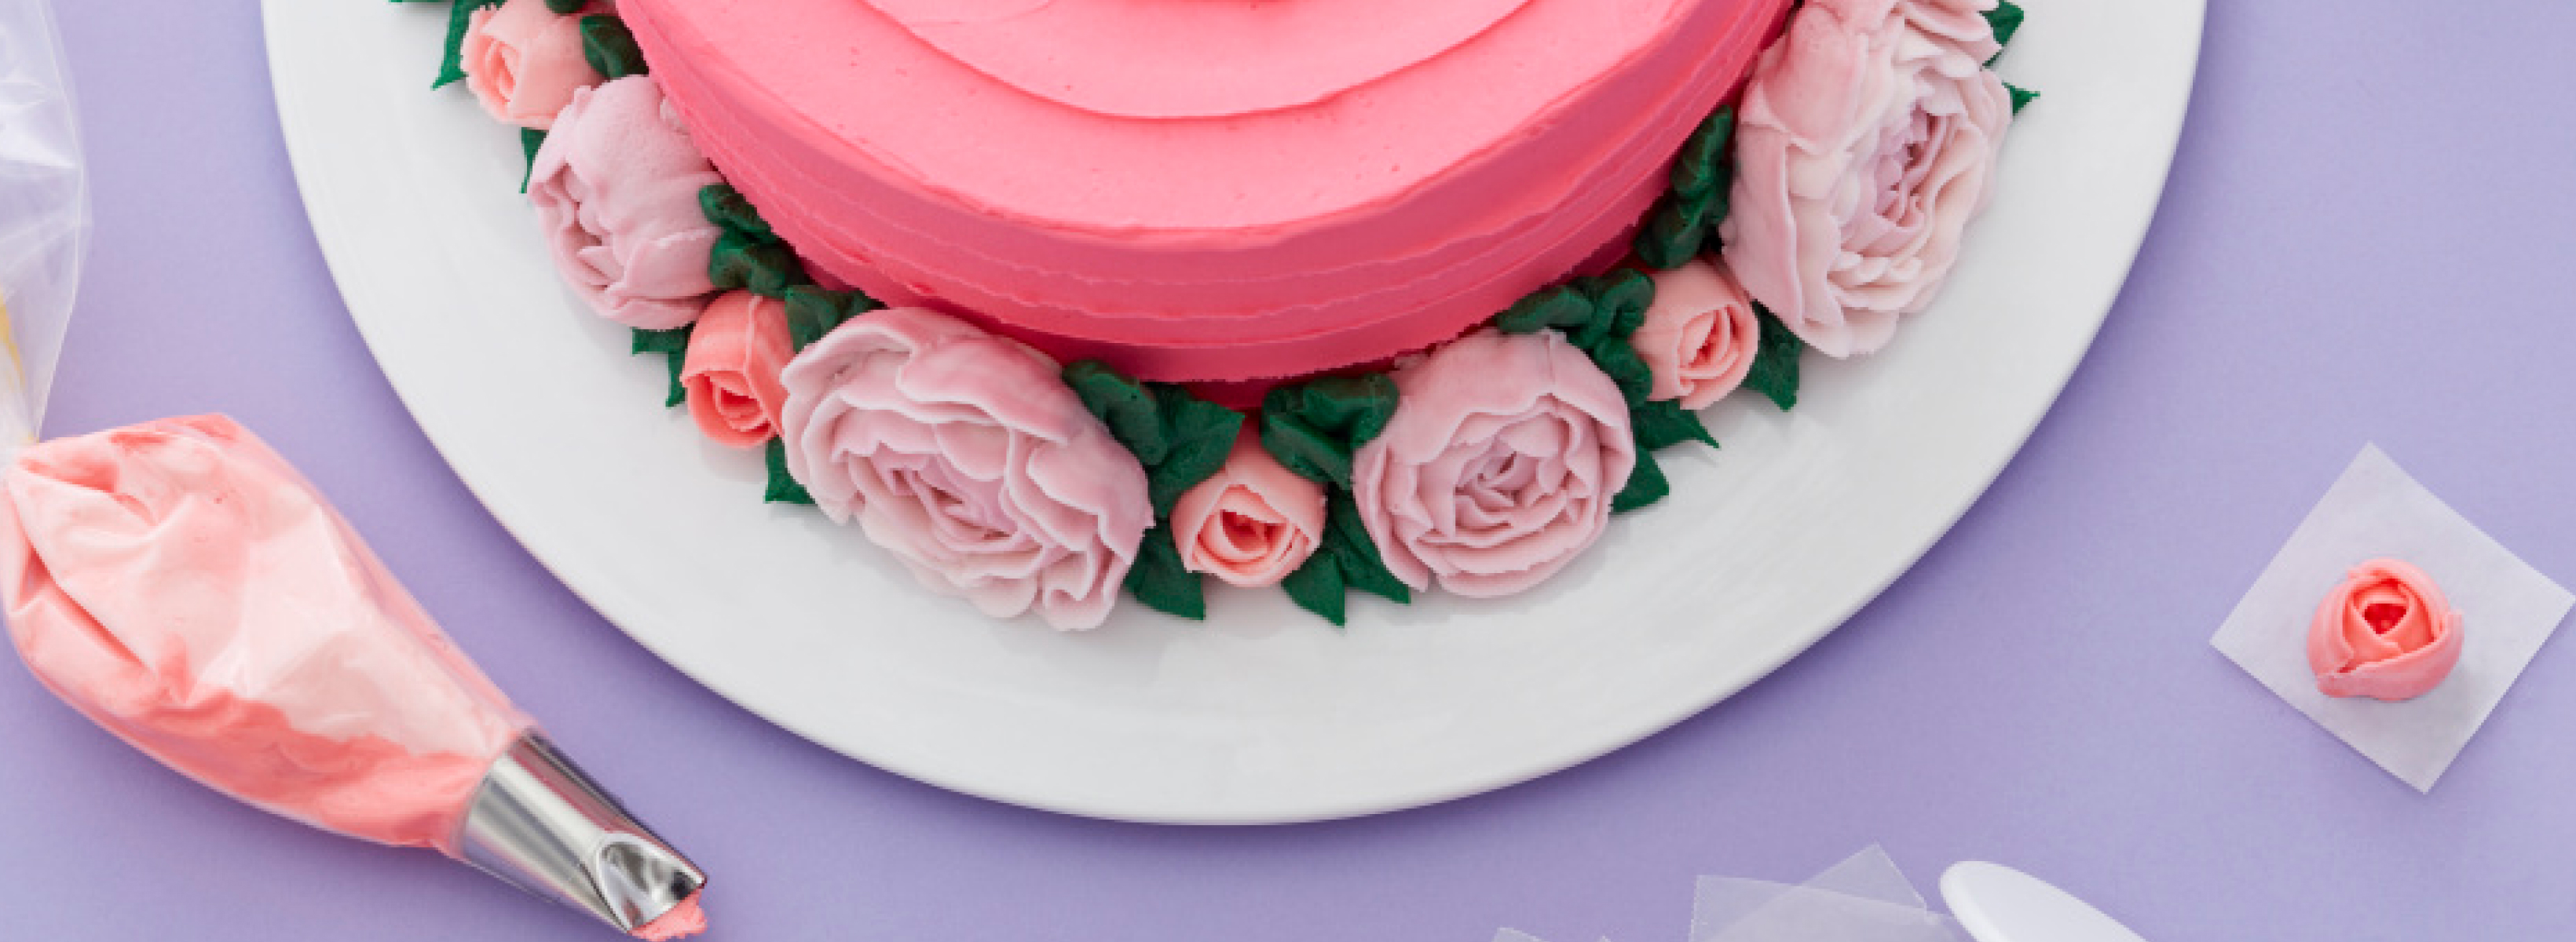 Pink cake with piped frosted roses